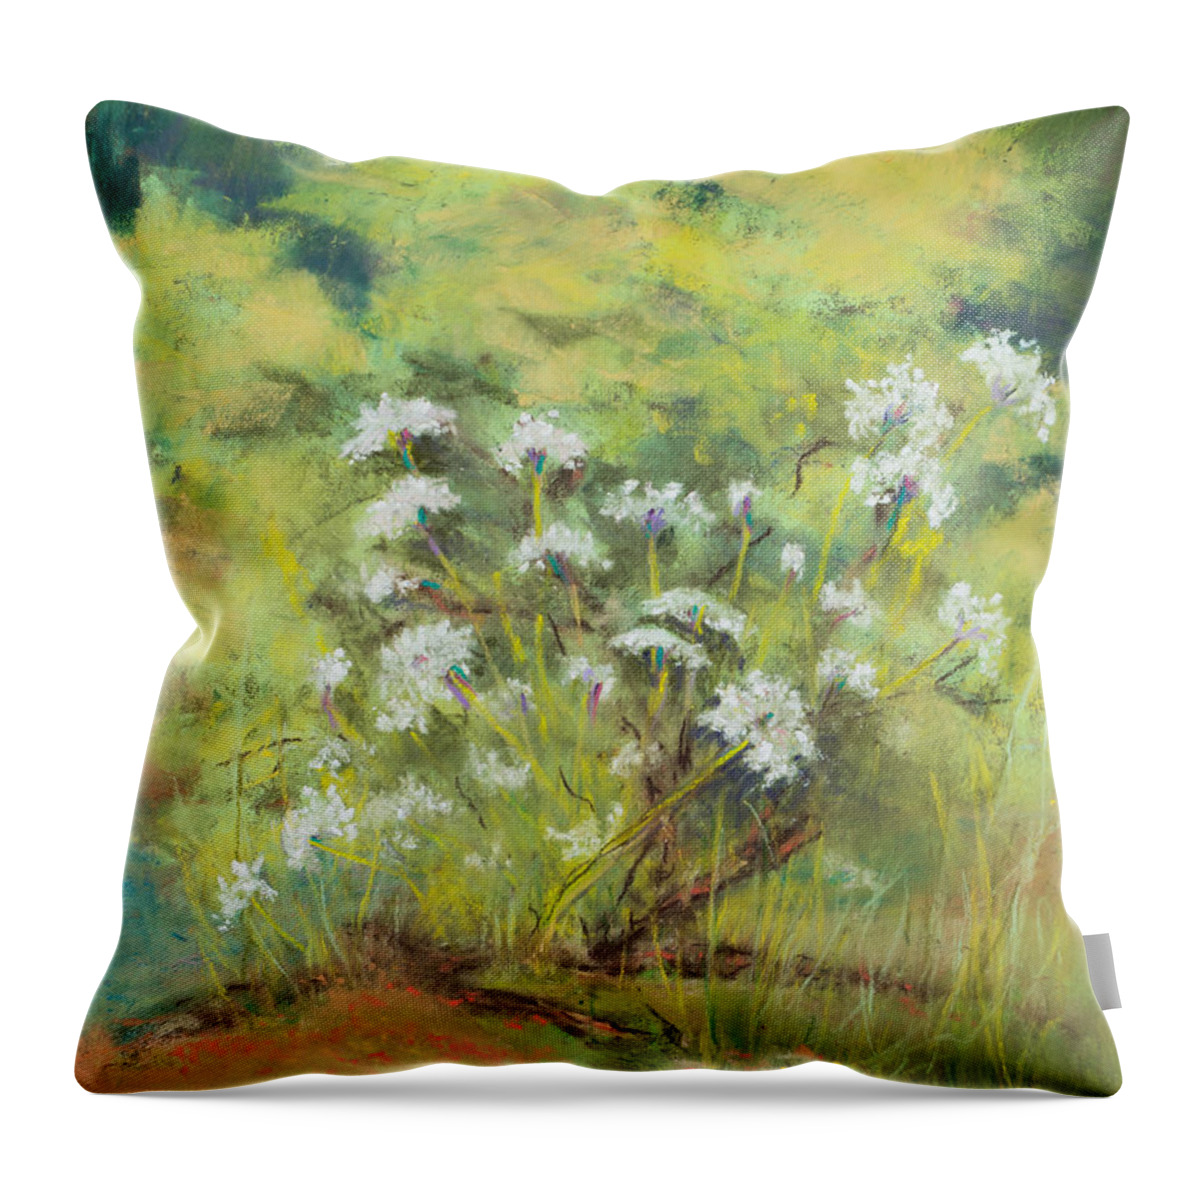 Pastel Throw Pillow featuring the painting Royalty by Lee Beuther